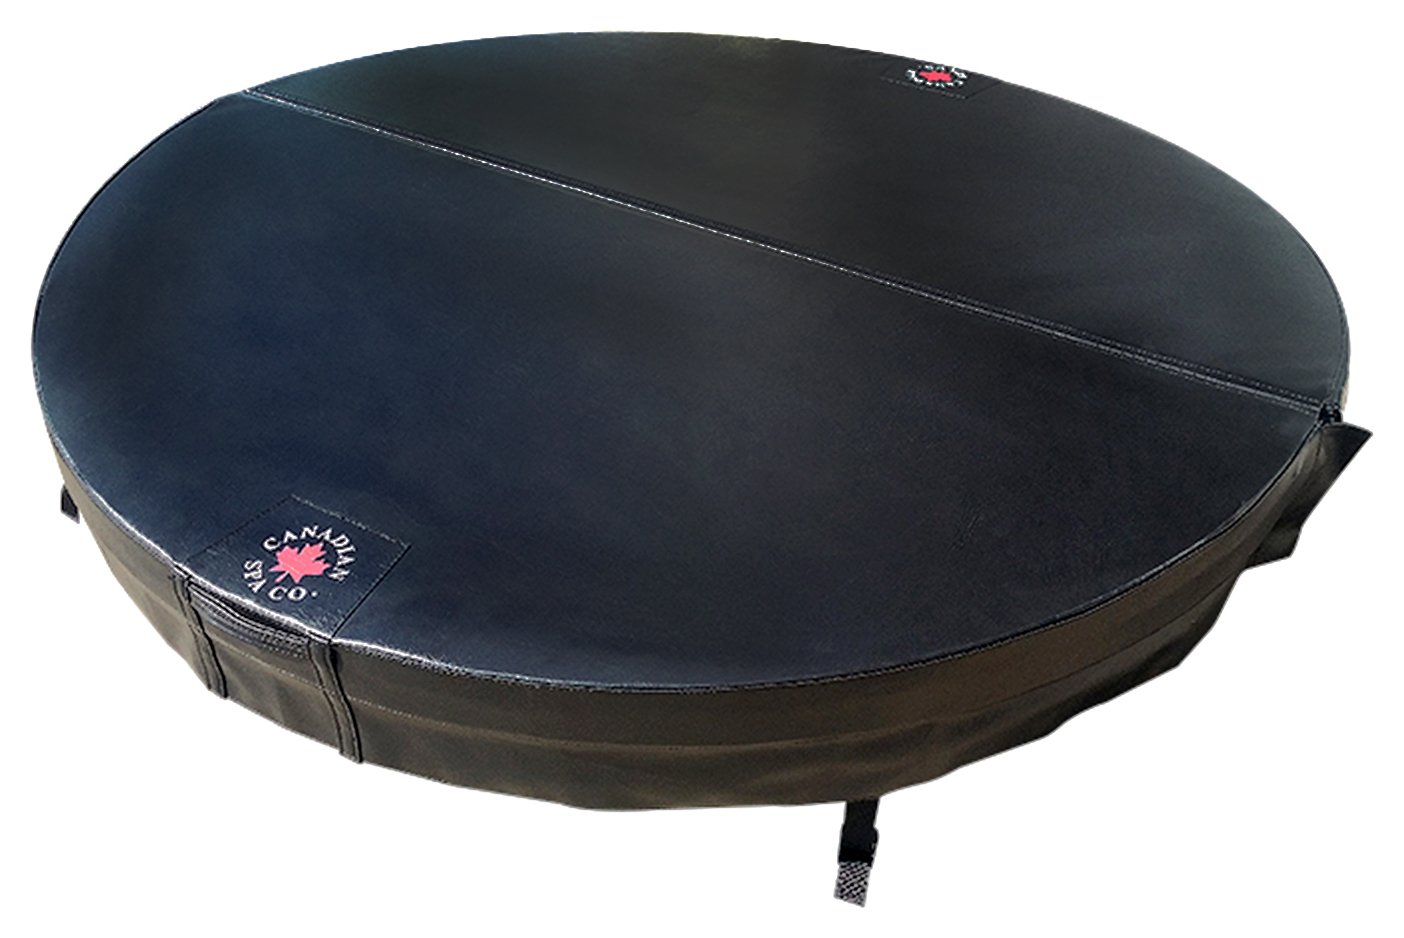 Canadian Spa Swift Hot Tub Hard Top Cover